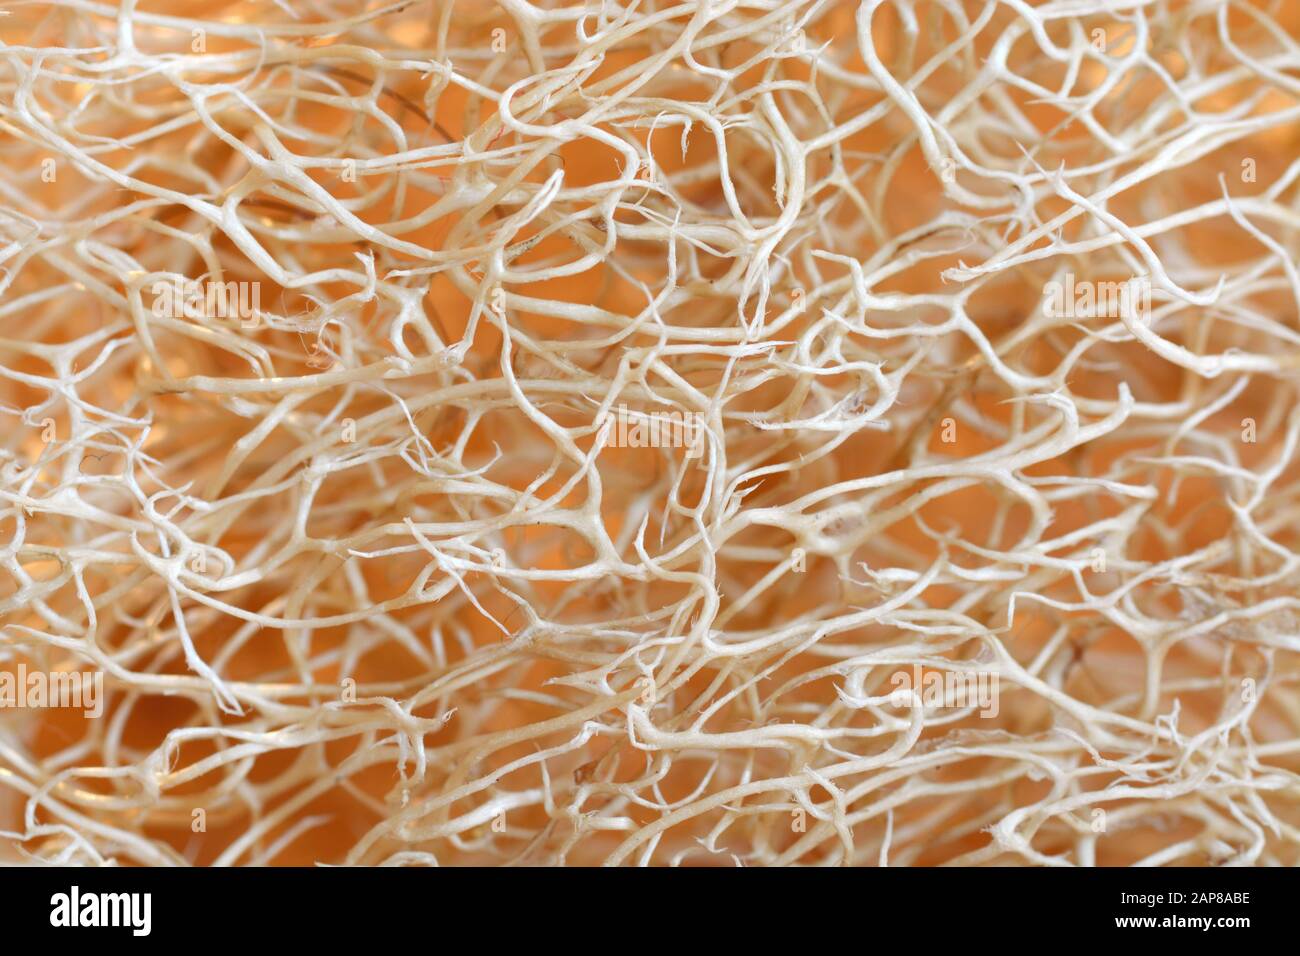 Background texture of the fibers from a dried luffa gourd Stock Photo